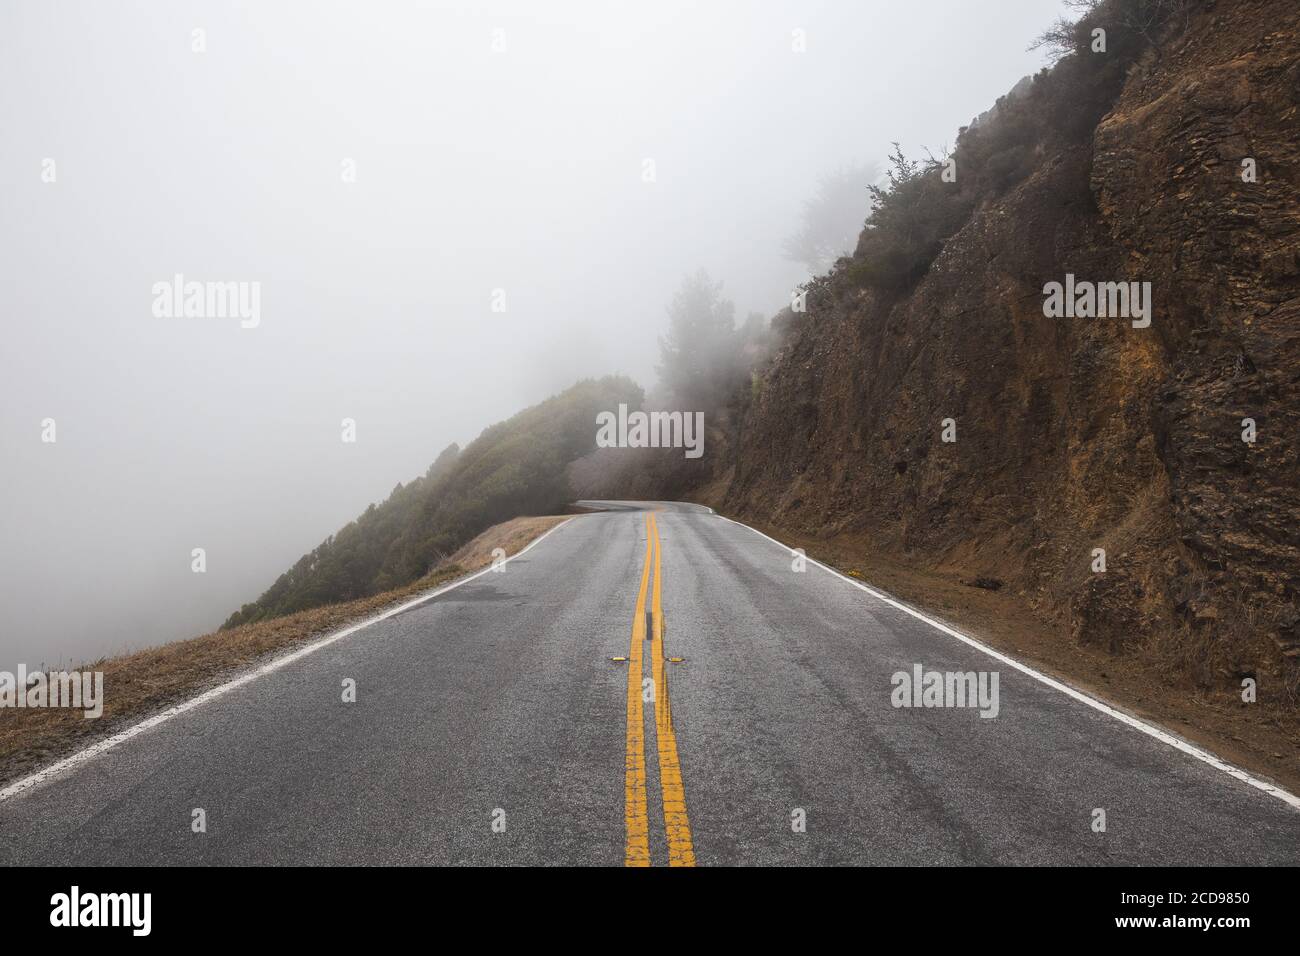 Beautiful shot of the highway leading into a misty environment Stock Photo